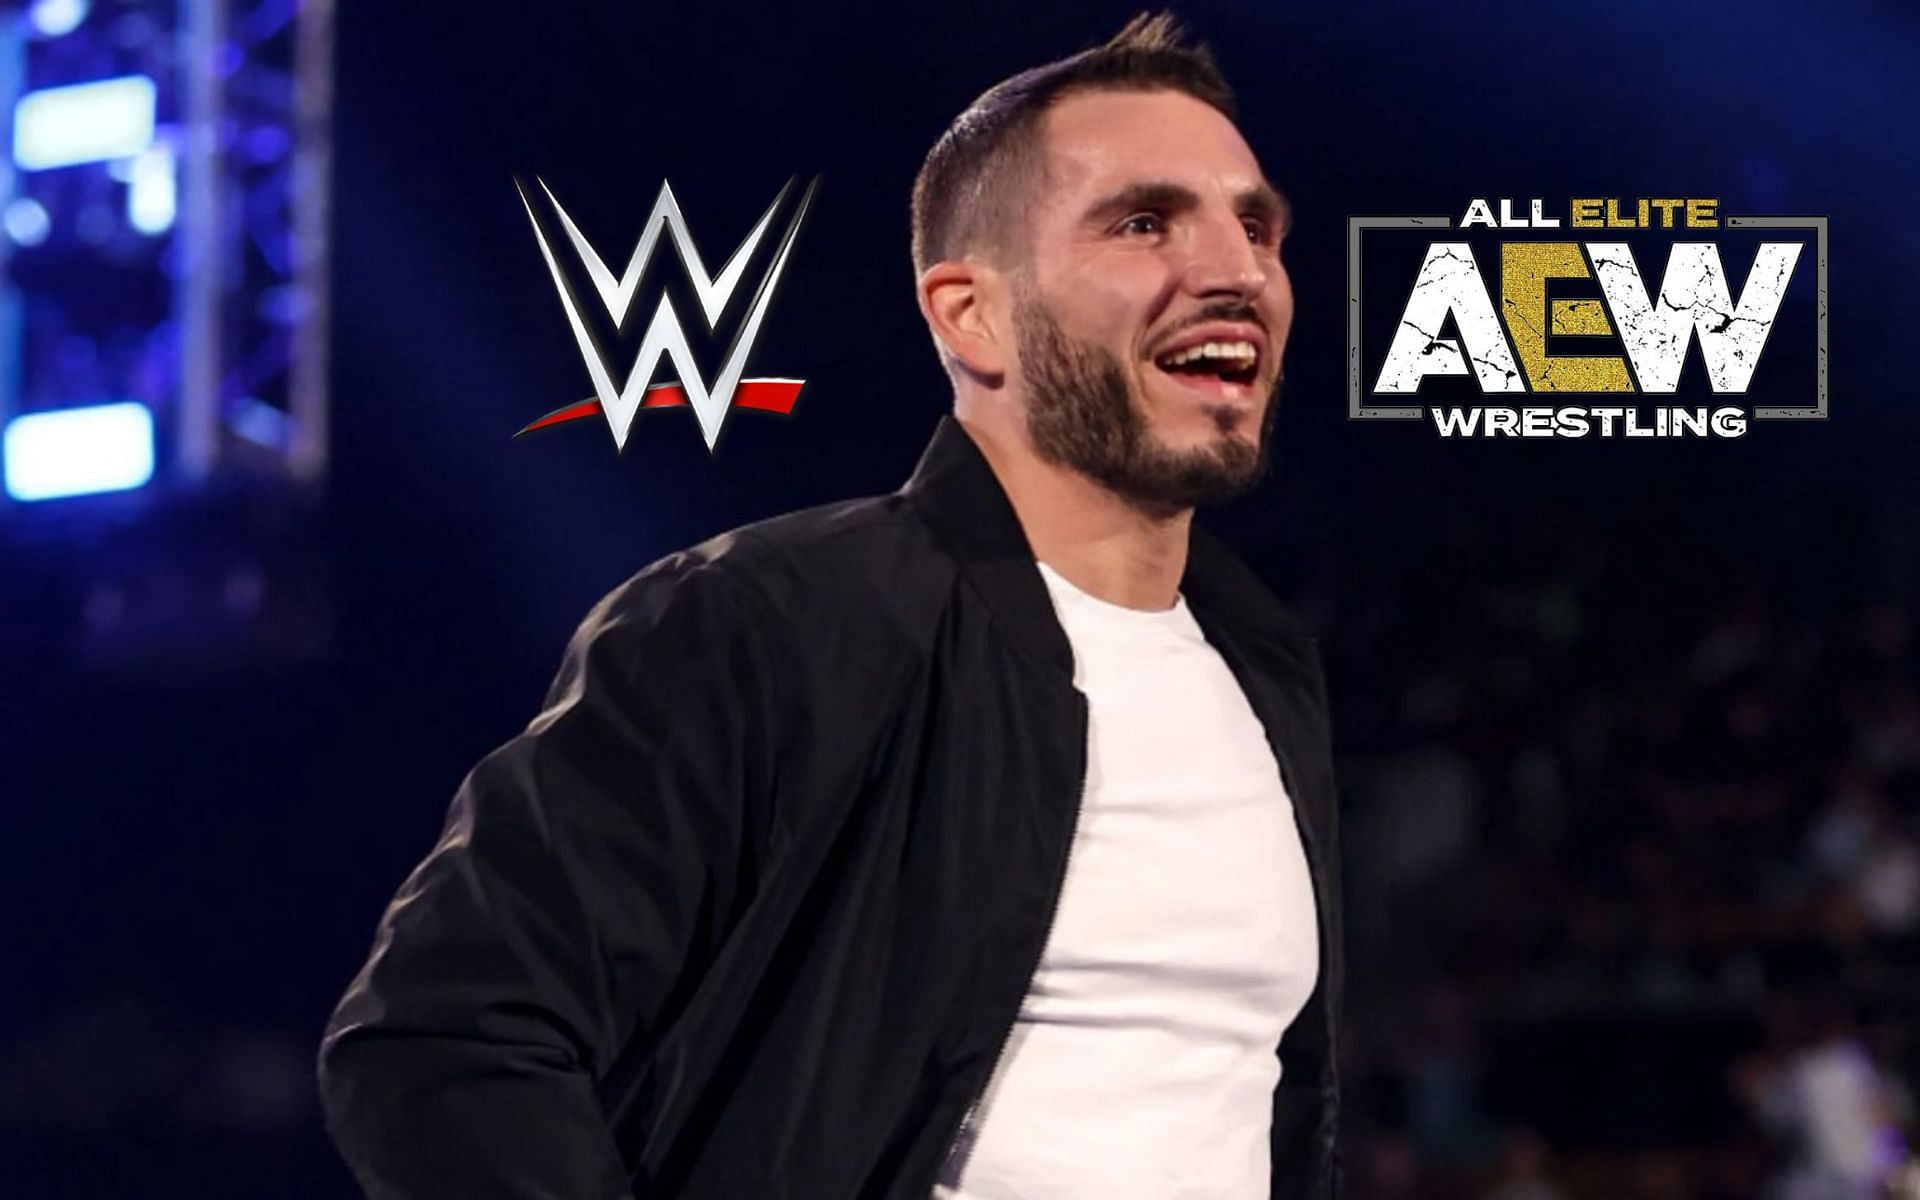 A WWE veteran placed this top AEW star in the Johnny Gargano category.